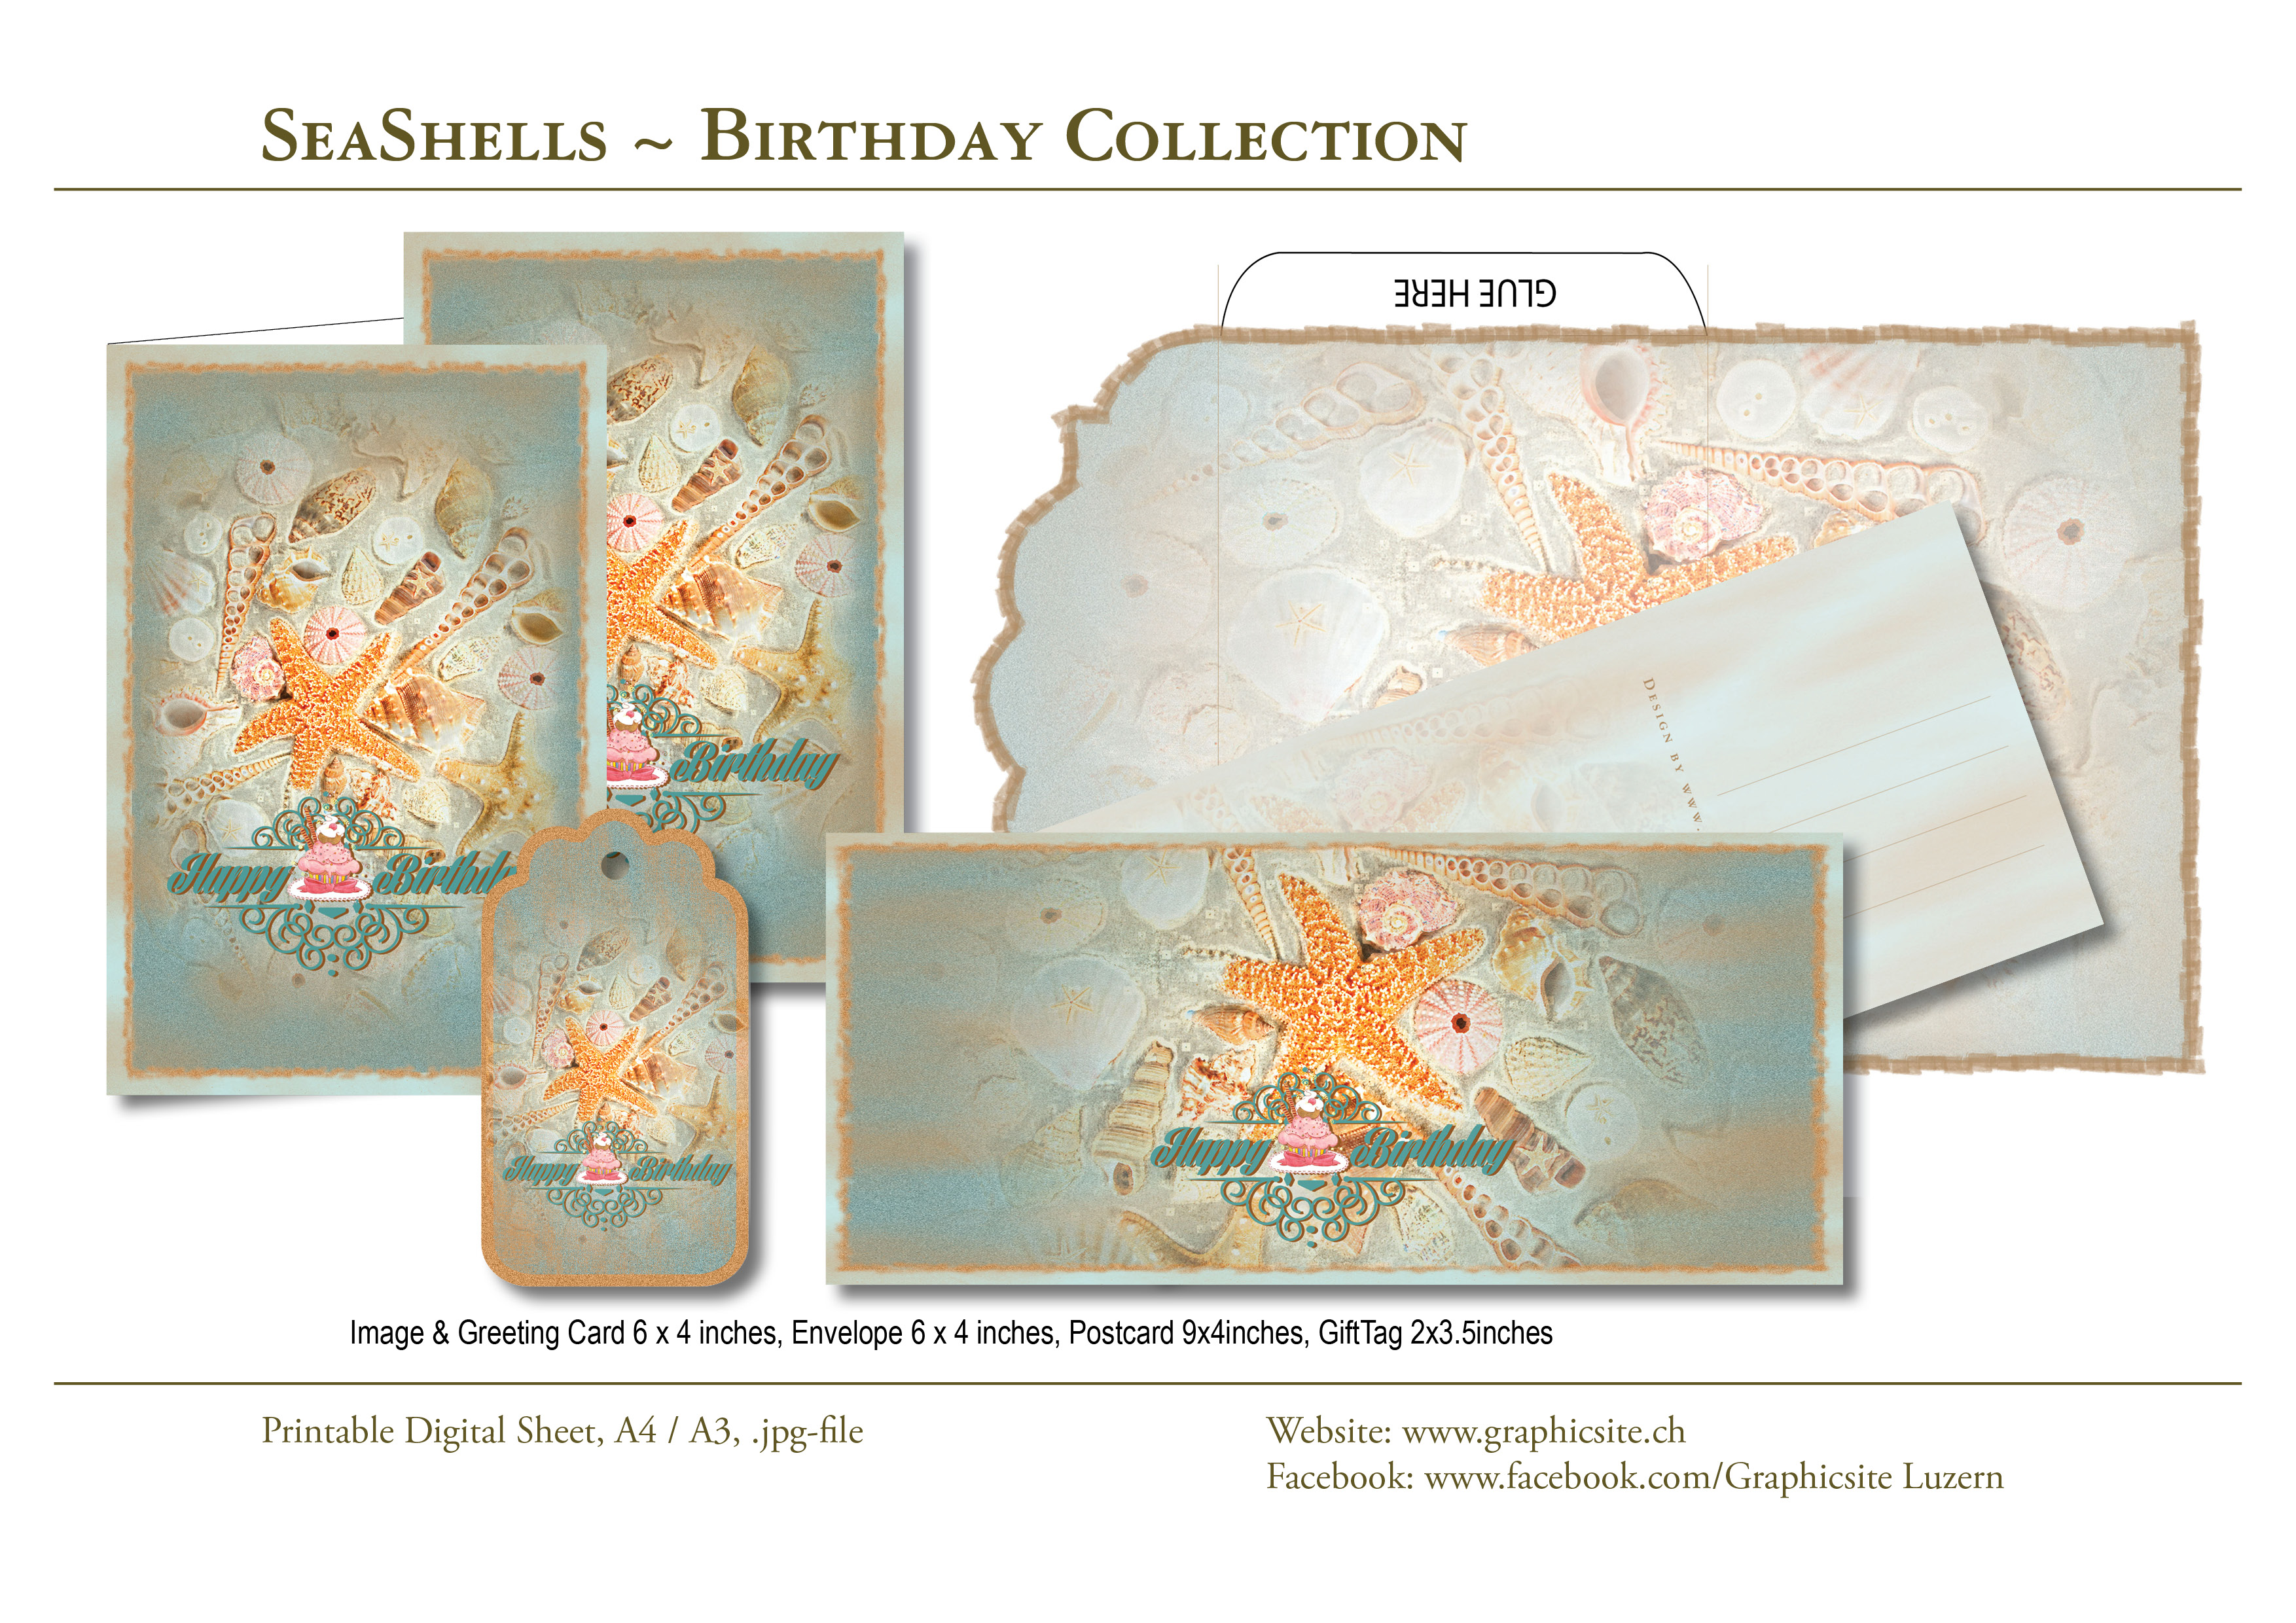 Printable Digital Sheets - Birthday Collection - SeaShells - #birthday, #cards, #postcards, #envelope, #gift, #tags, #scrapbooking, #papergoods, #crafts,